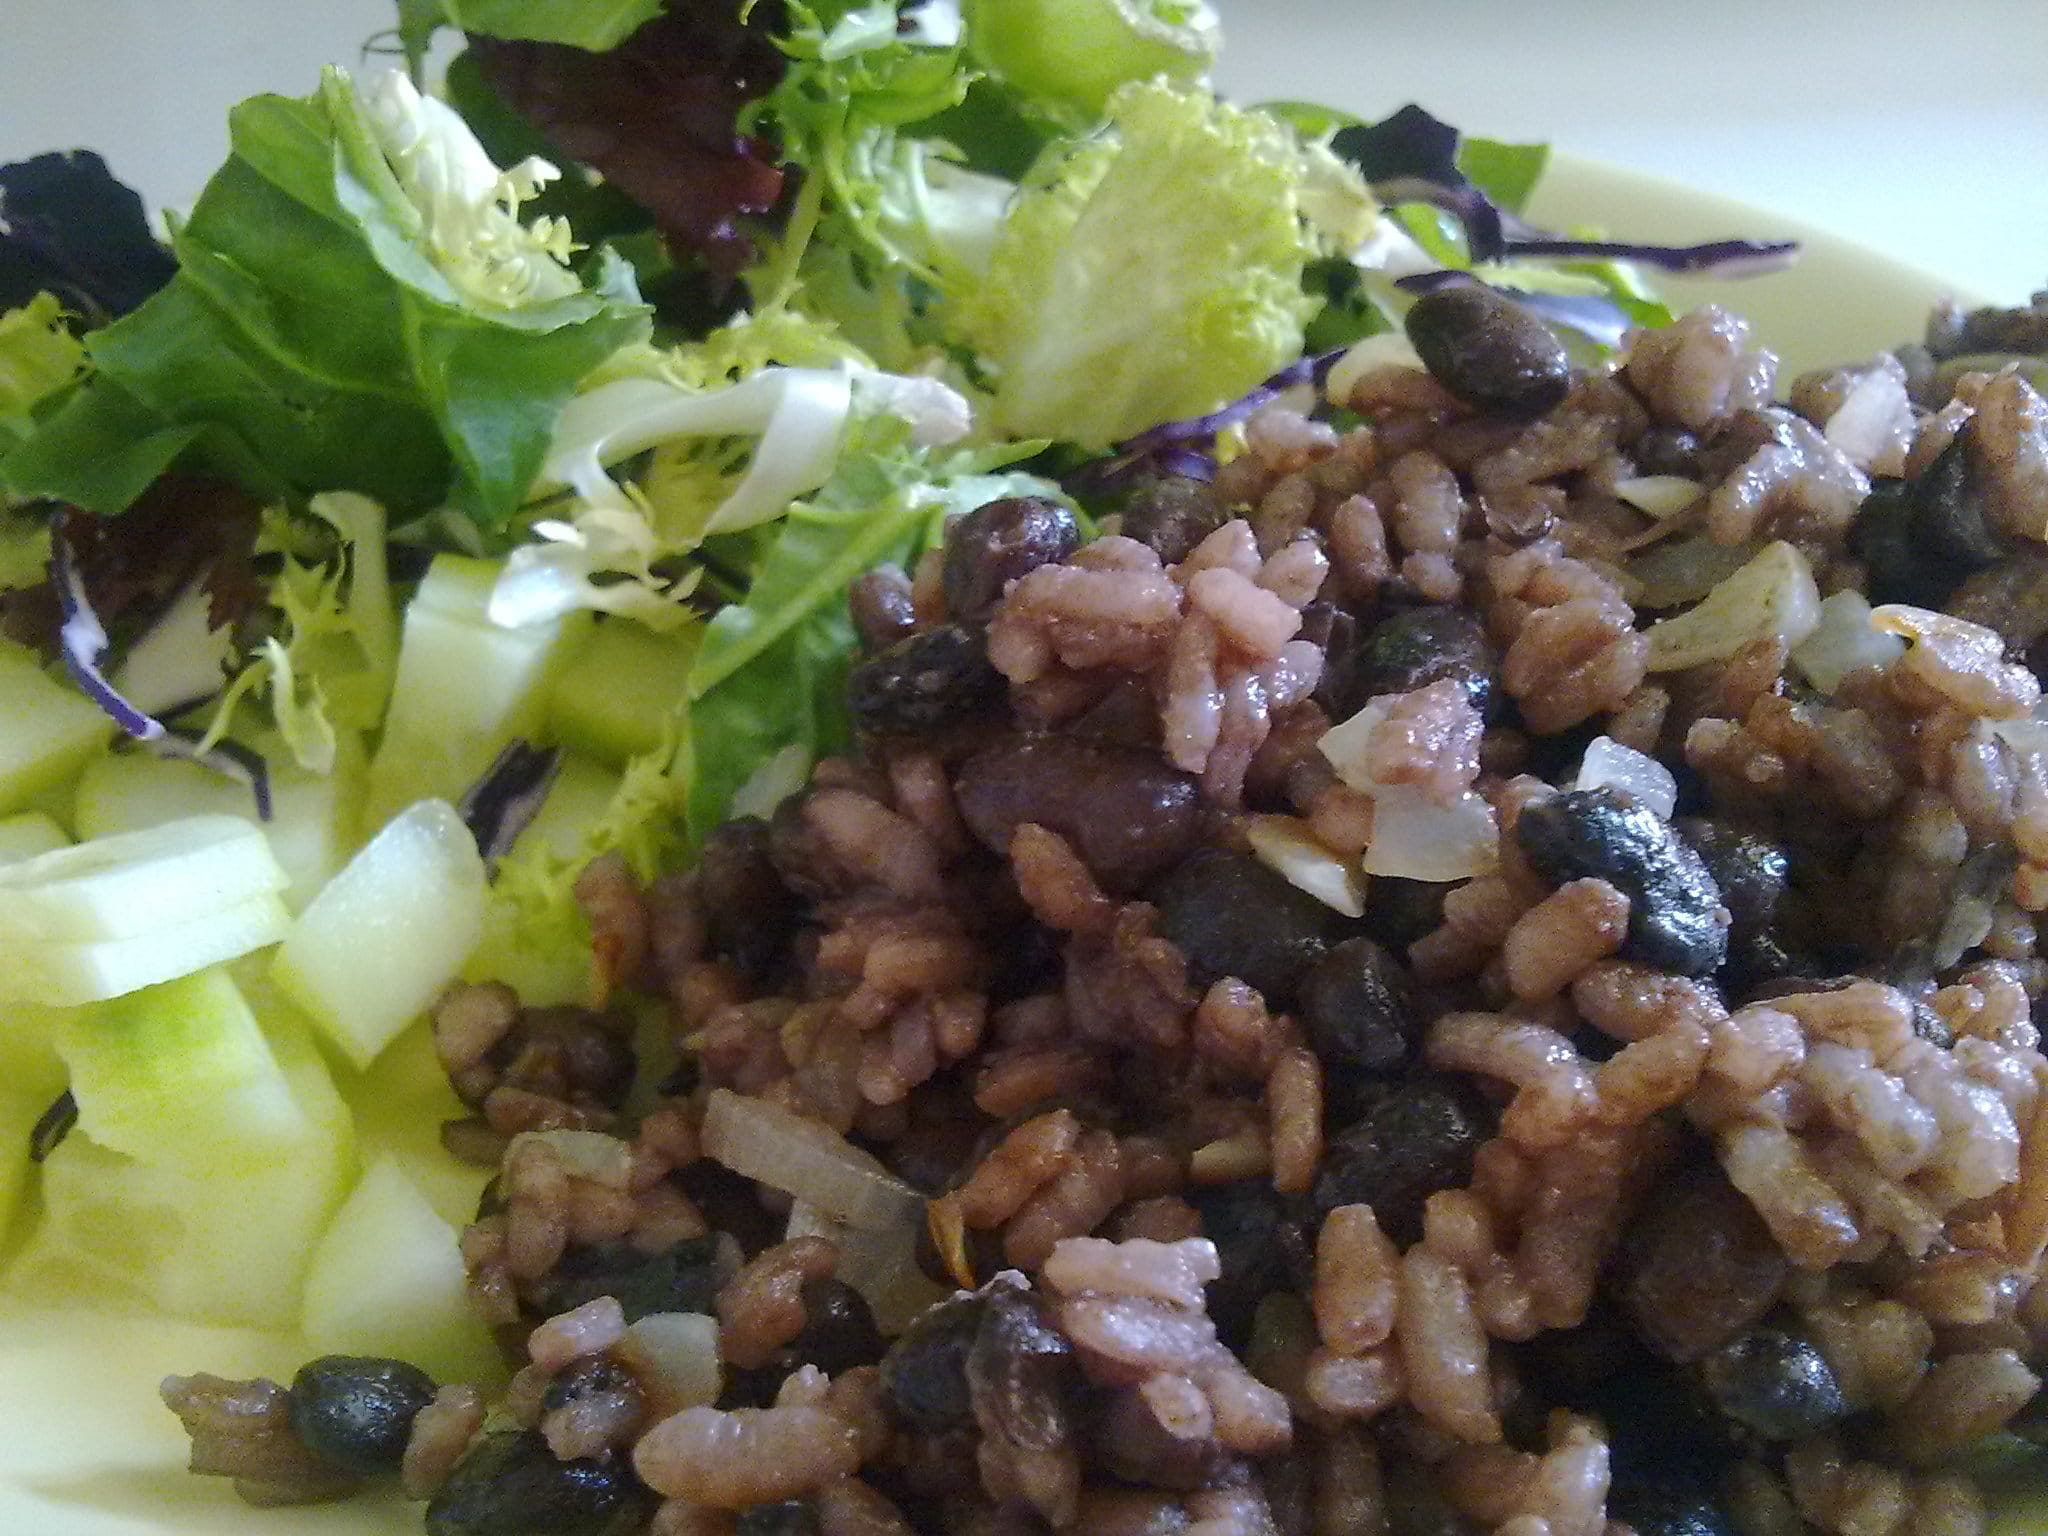 Gallo pinto served with salad